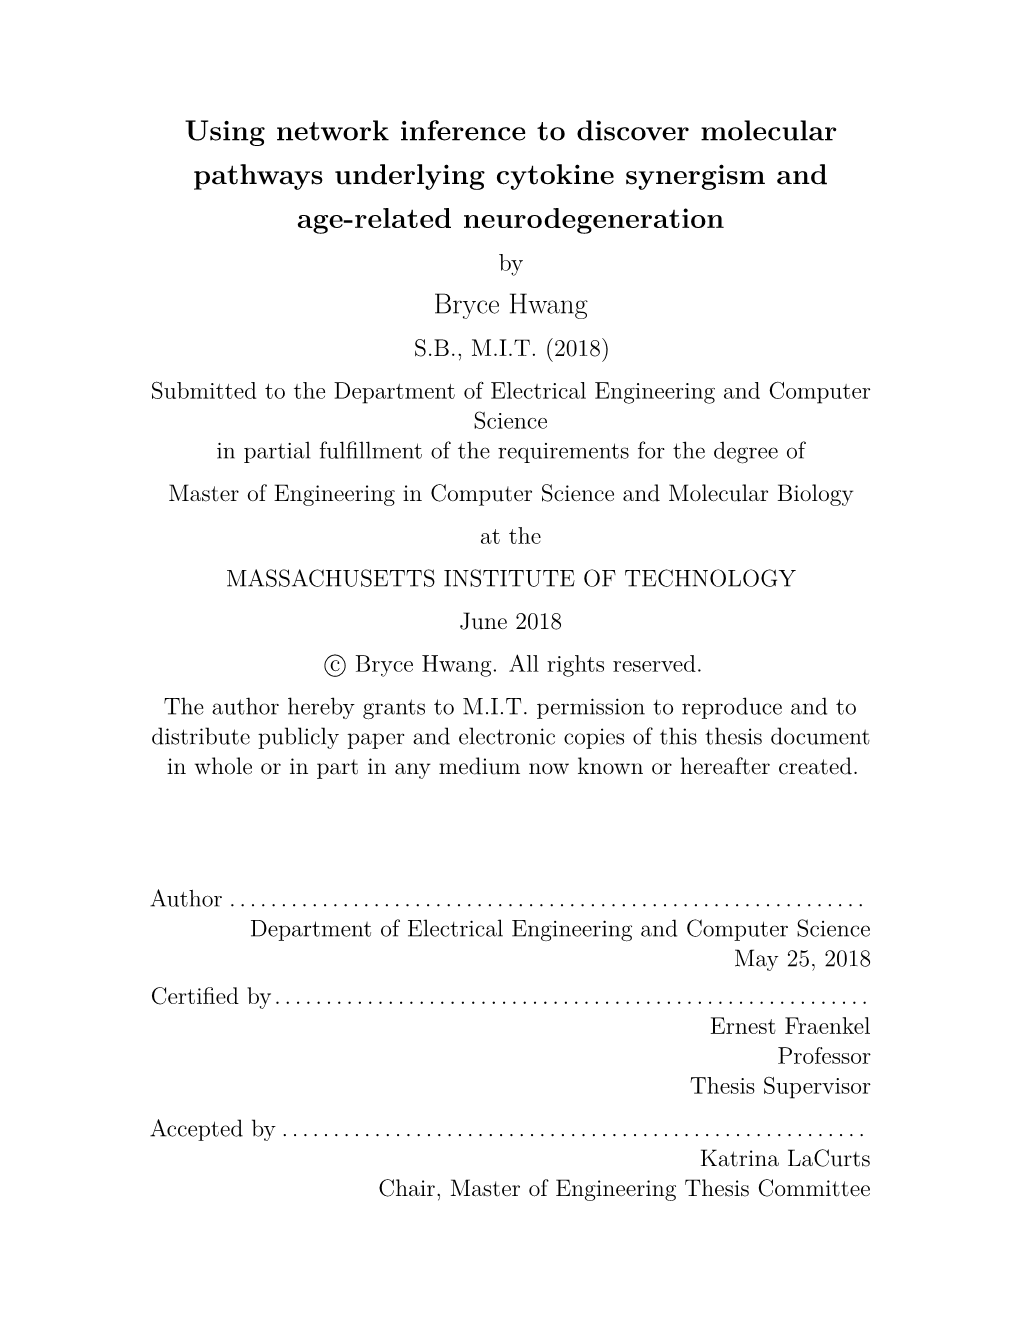 Using Network Inference to Discover Molecular Pathways Underlying Cytokine Synergism and Age-Related Neurodegeneration by Bryce Hwang S.B., M.I.T